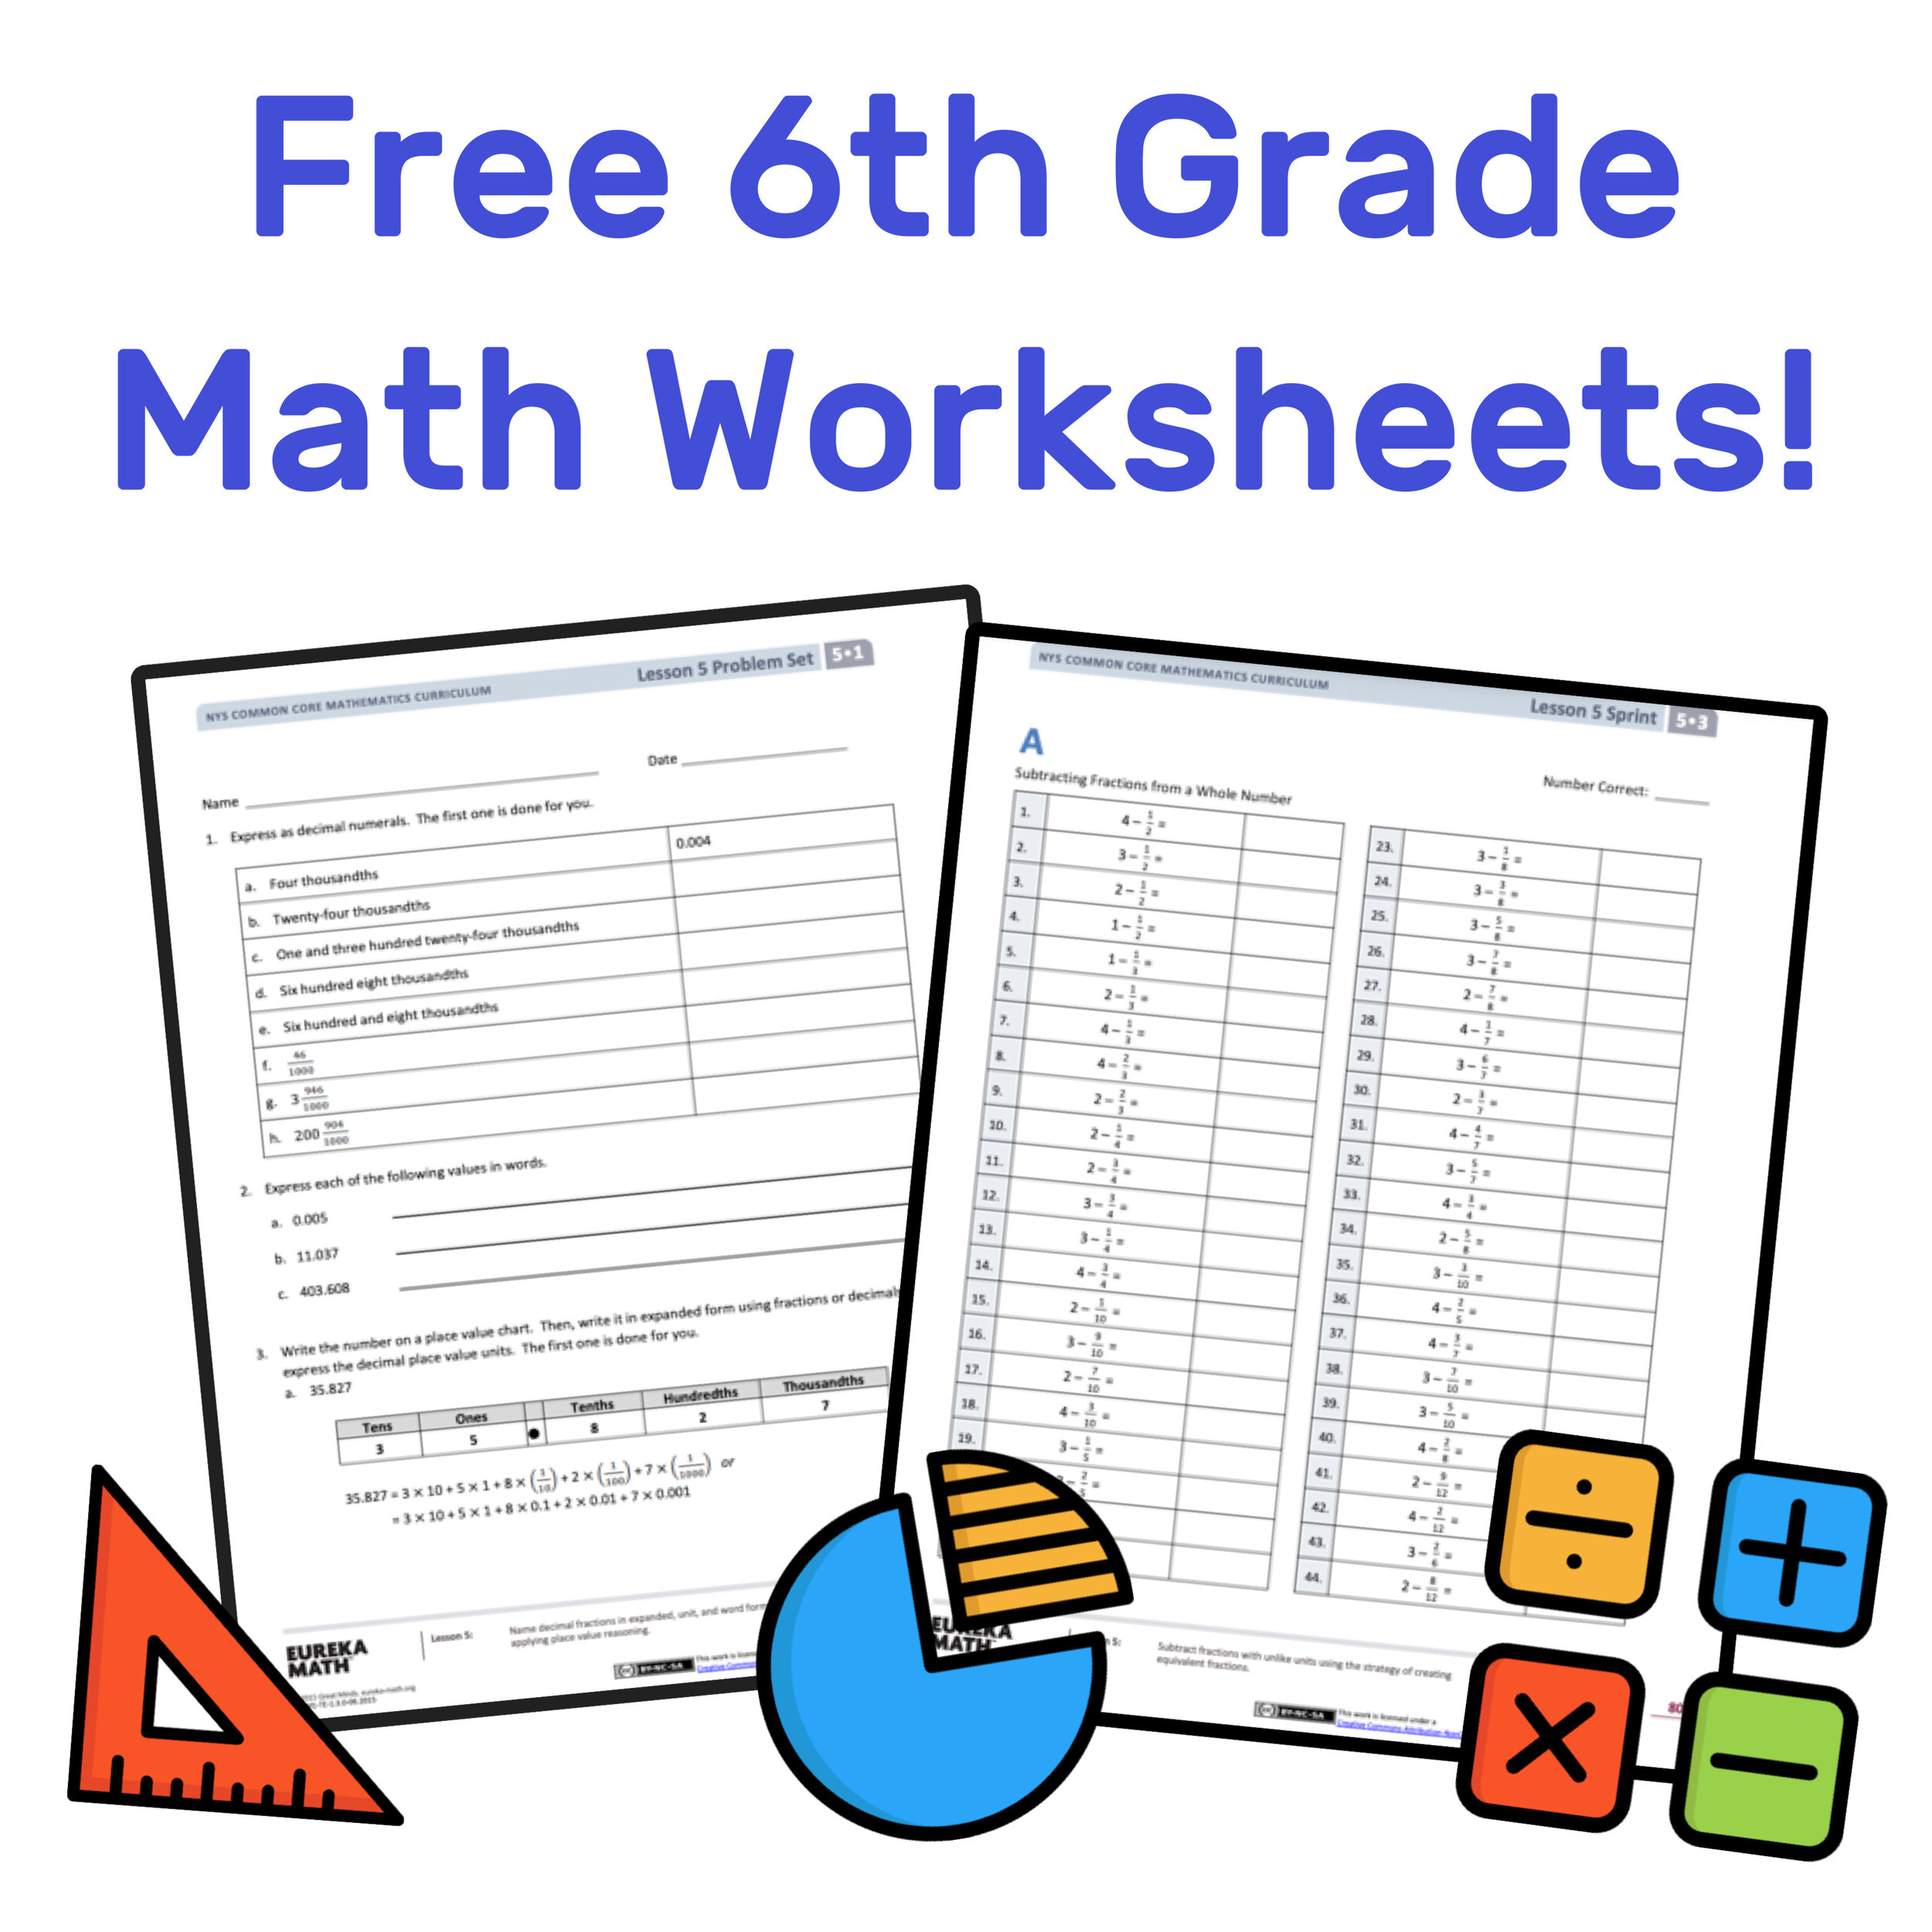 The Best Free 6Th Grade Math Resources: Complete List! — Mashup Math regarding Free Printable 6Th Grade Worksheets